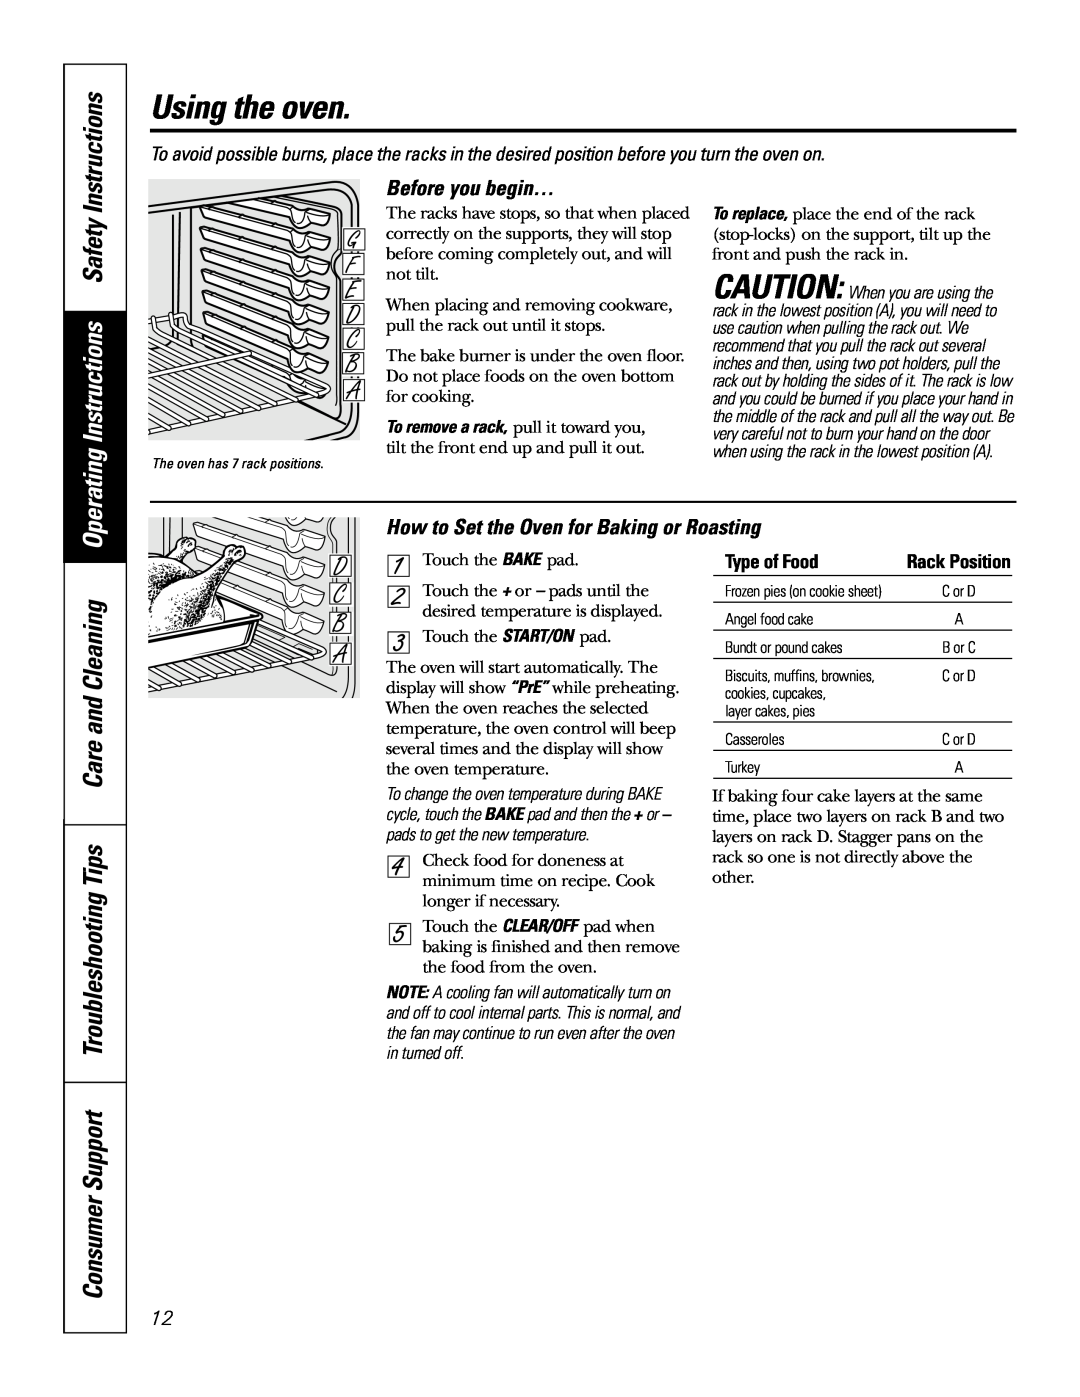 GE JGSP28 Using the oven, Operating Instructions Safety, Before you begin…, How to Set the Oven for Baking or Roasting 